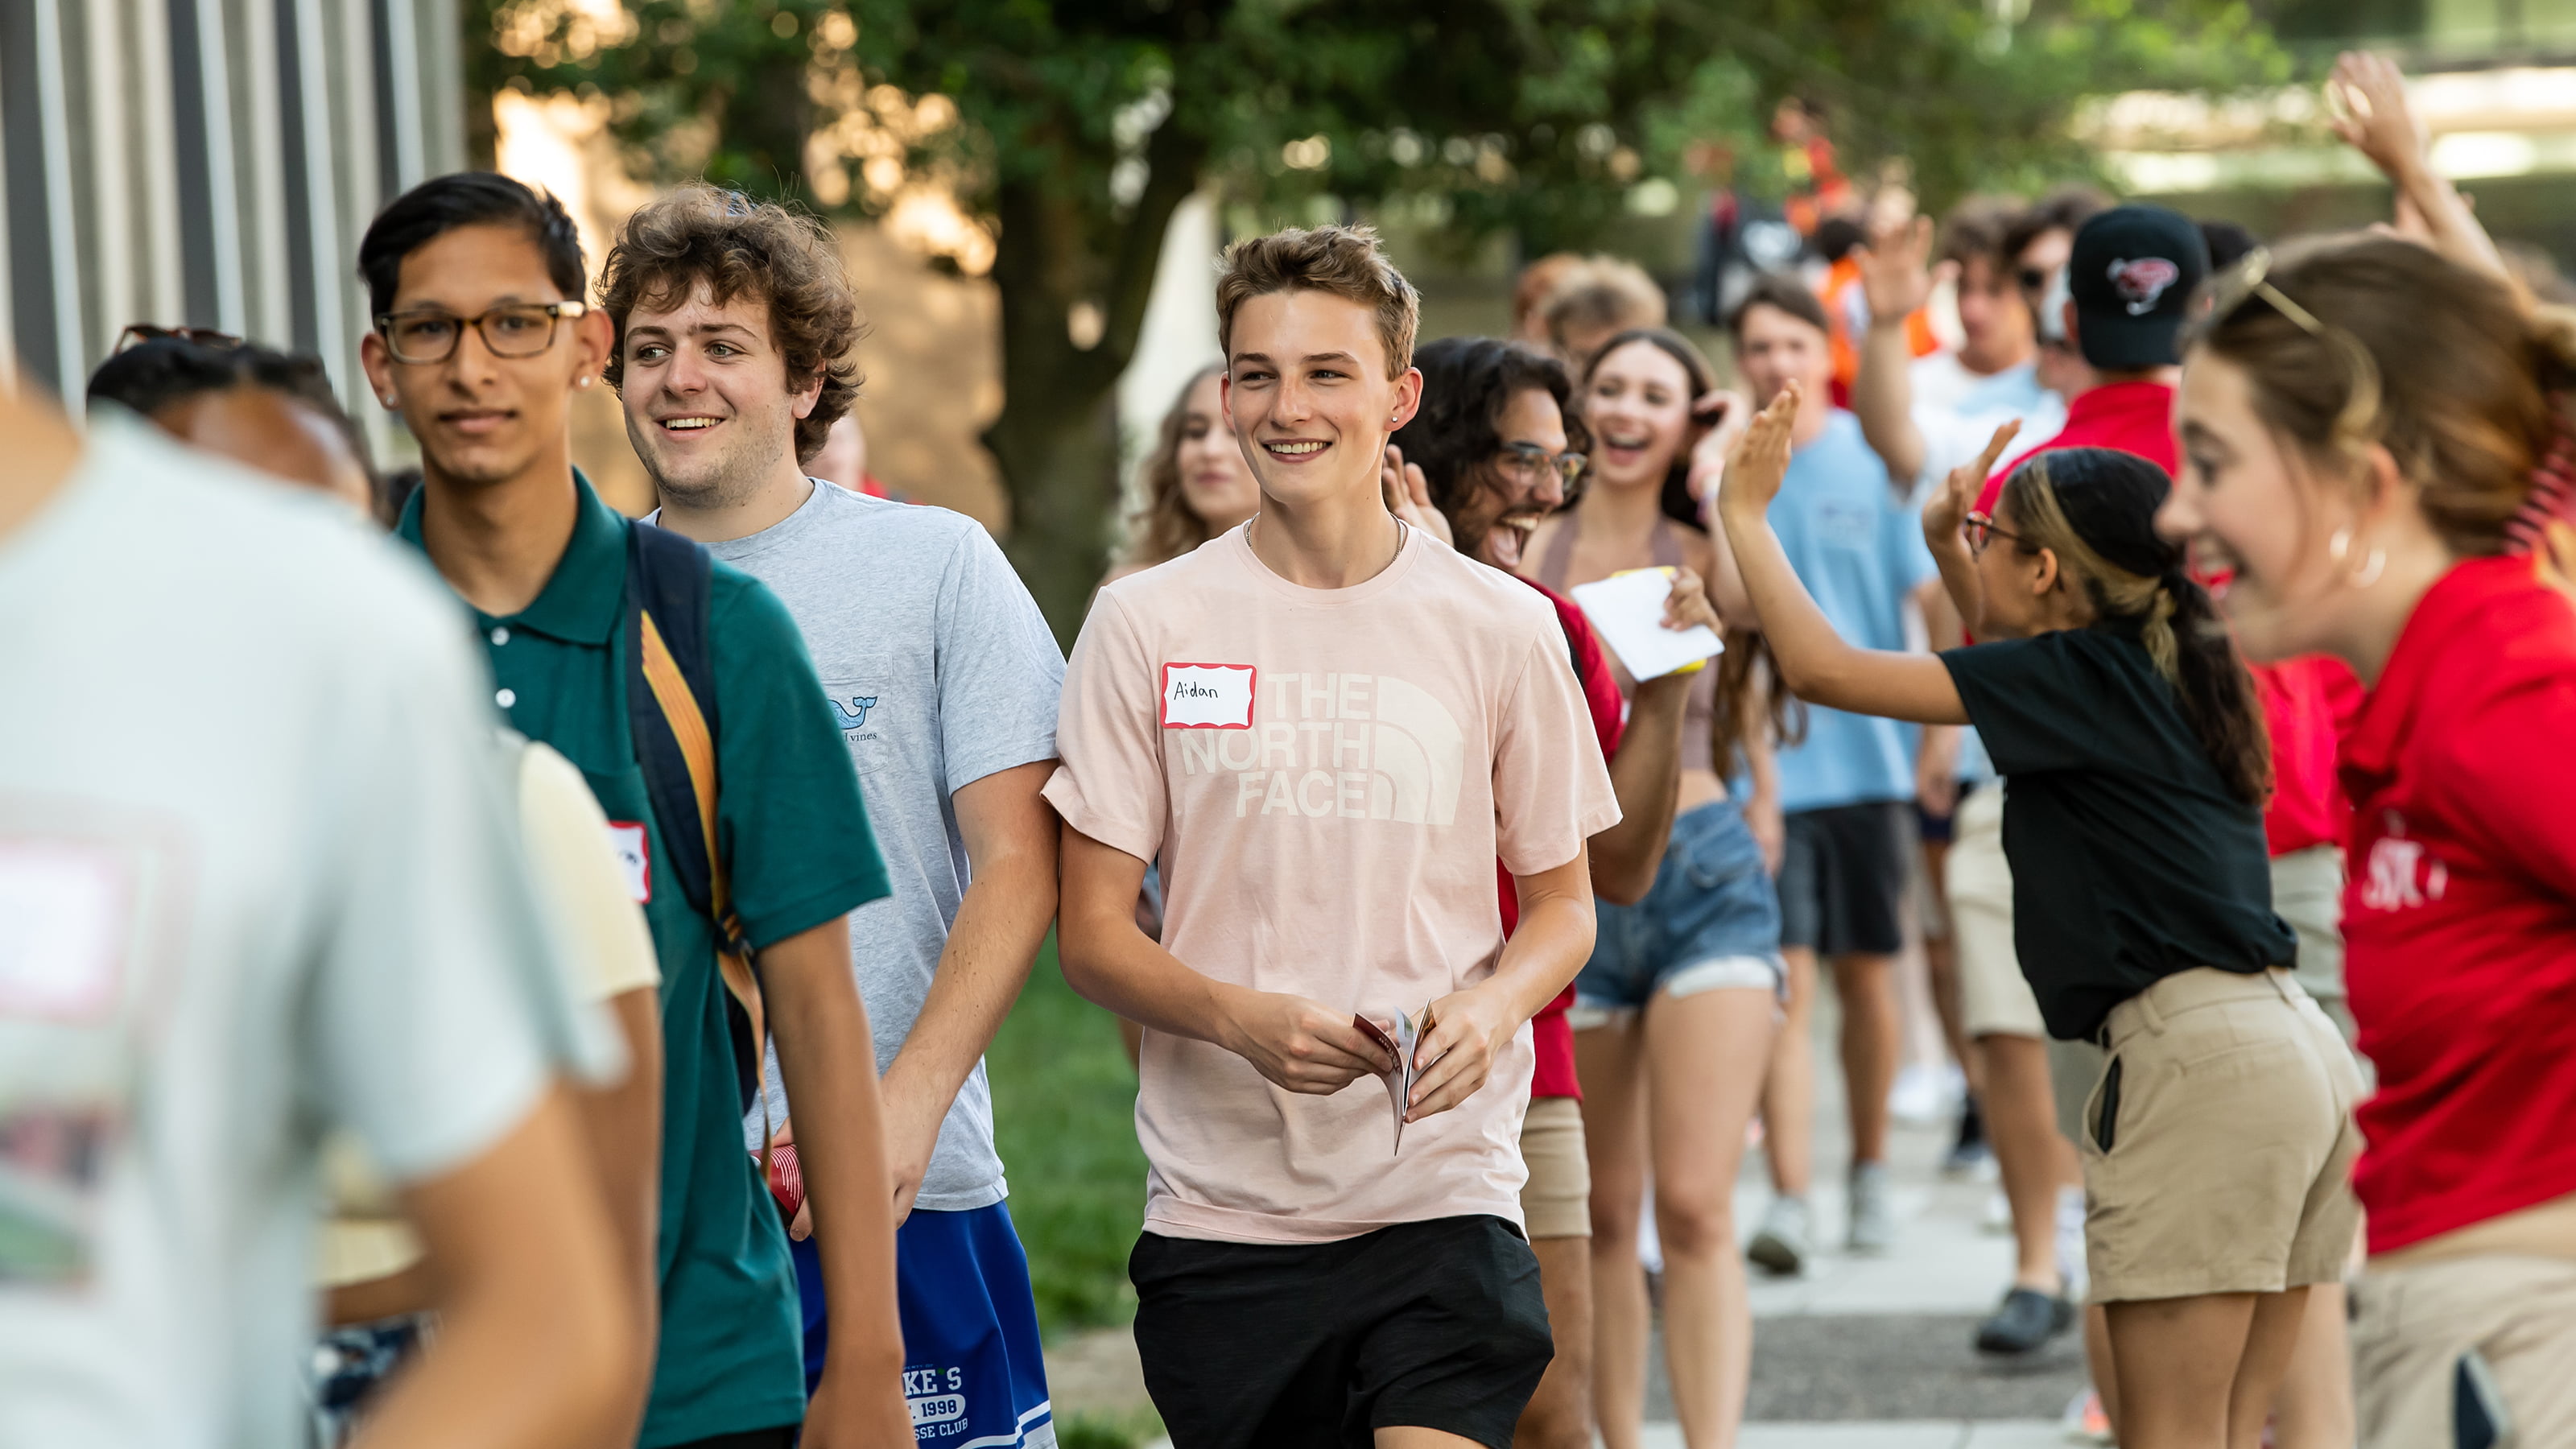 Saint Joseph's University first-year students on campus for orientation